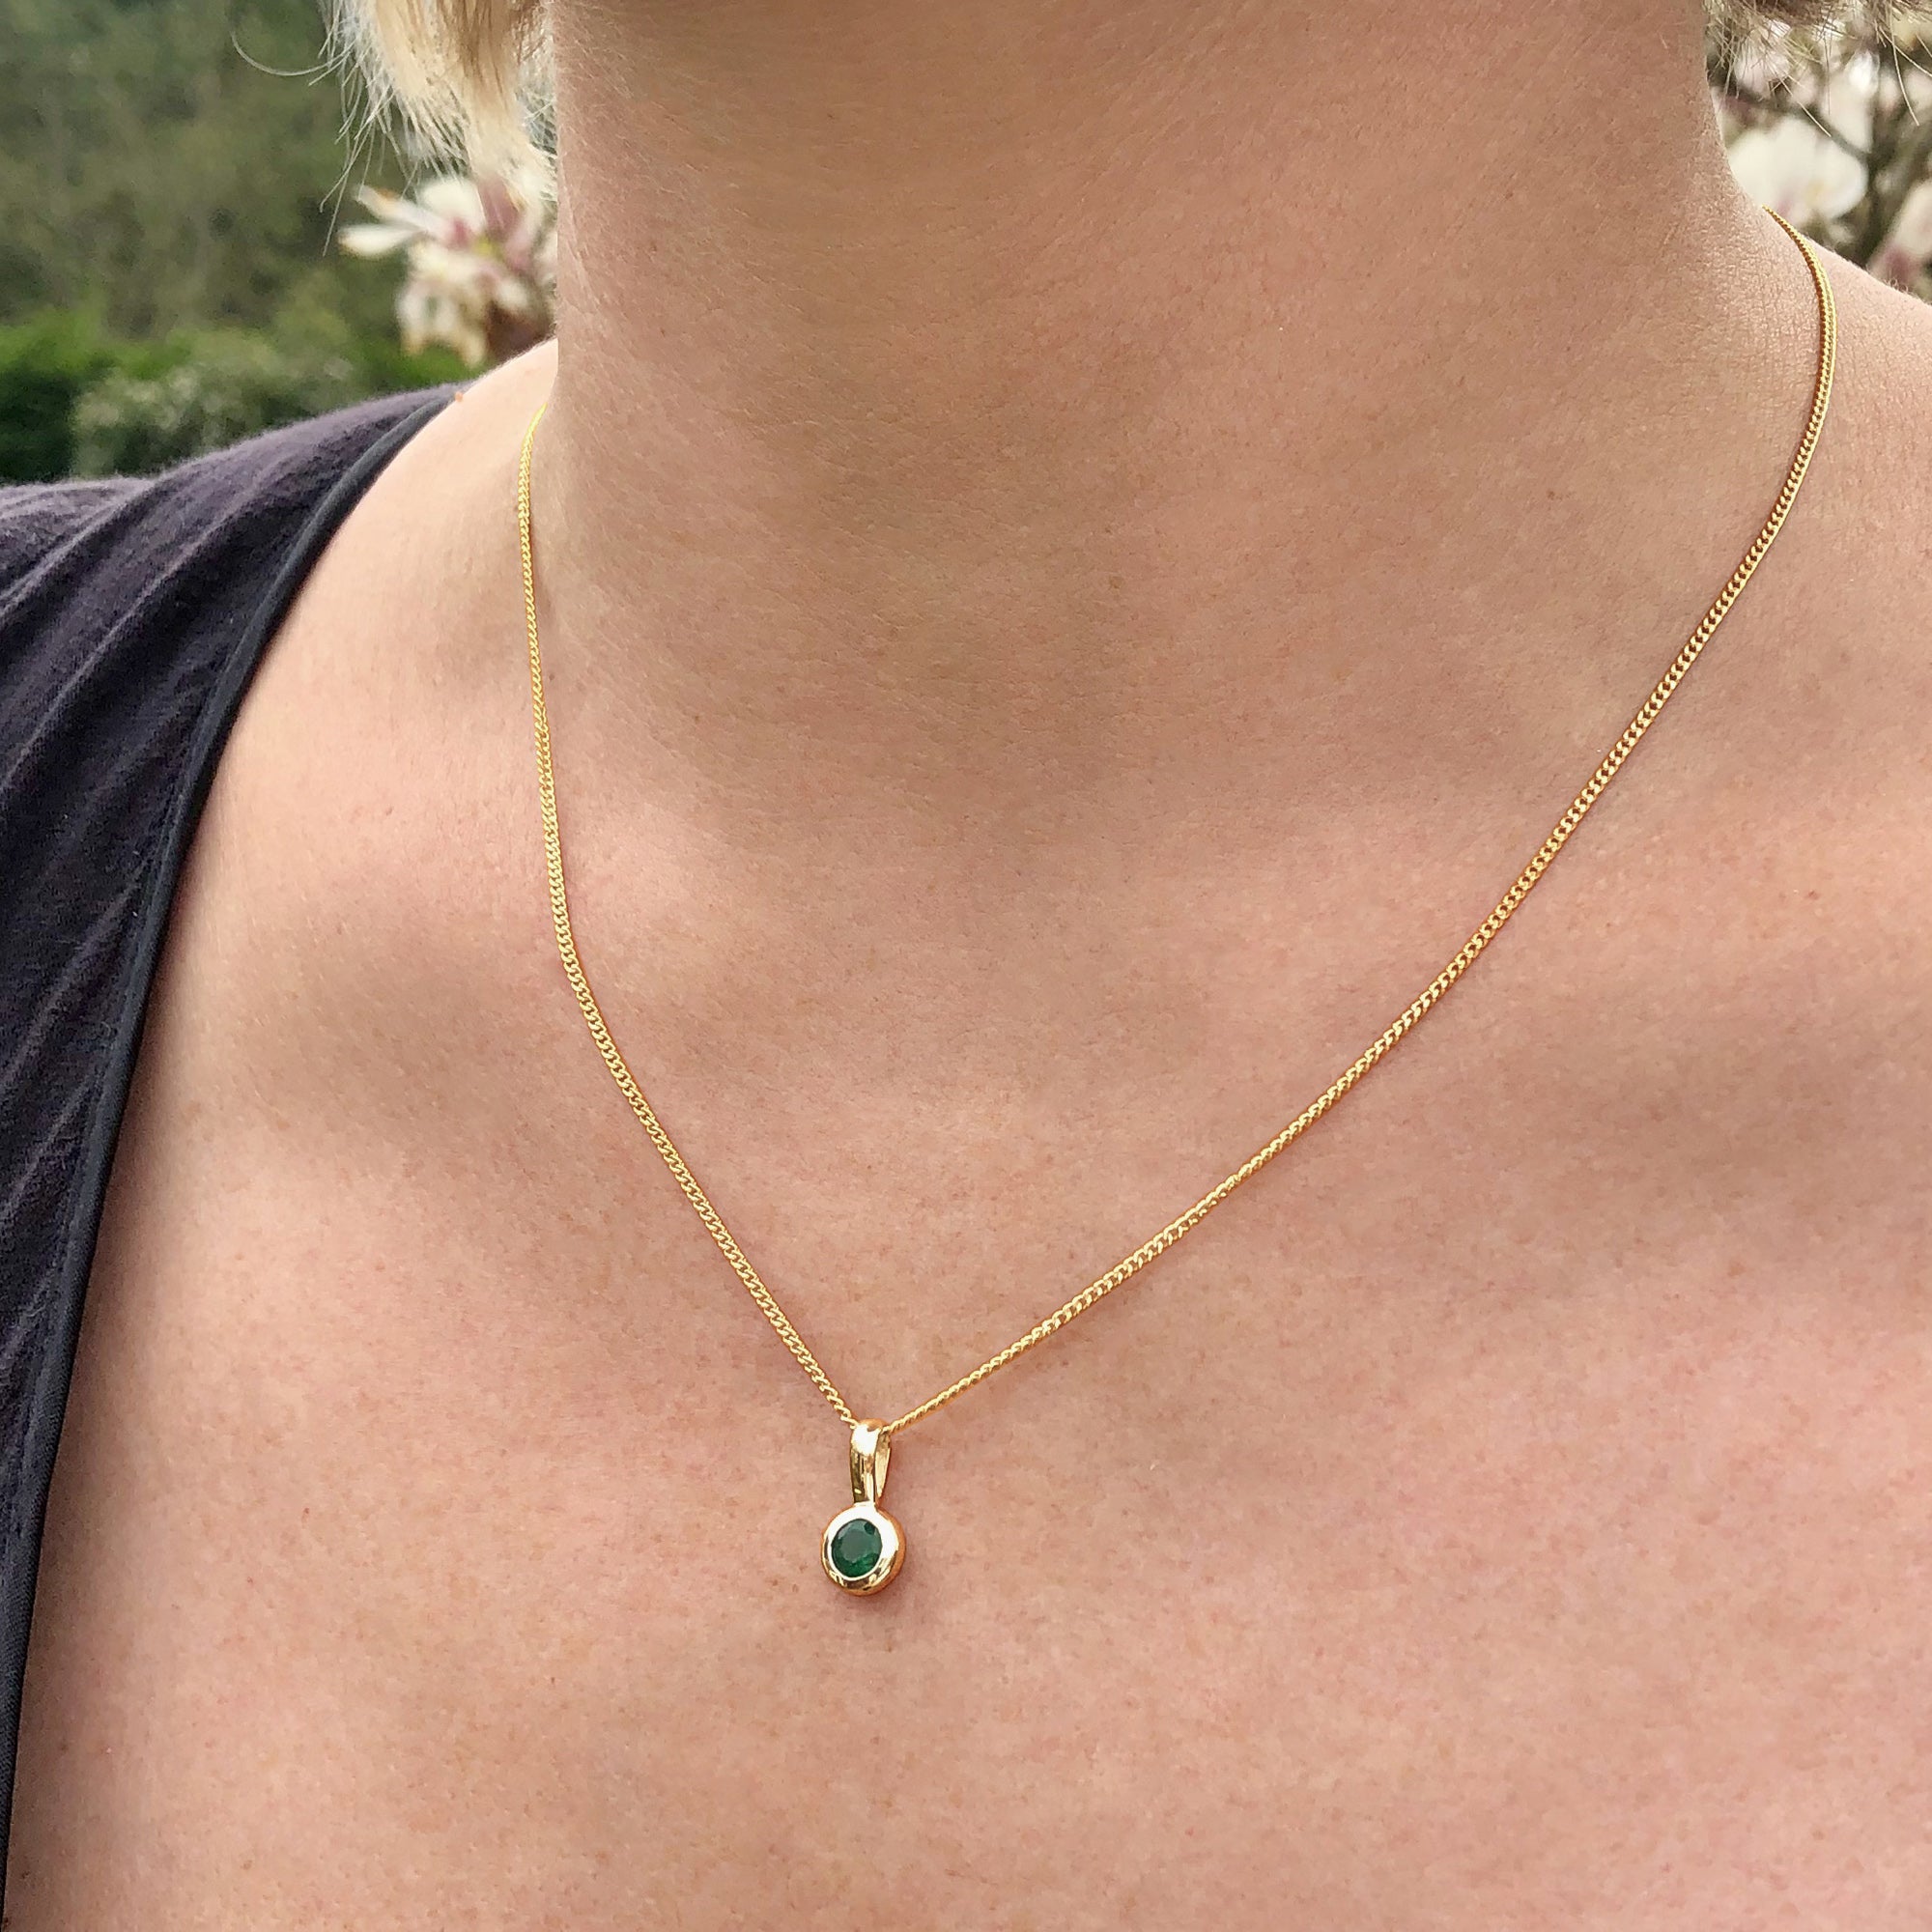 Emerald May Birthstone Charm Necklace